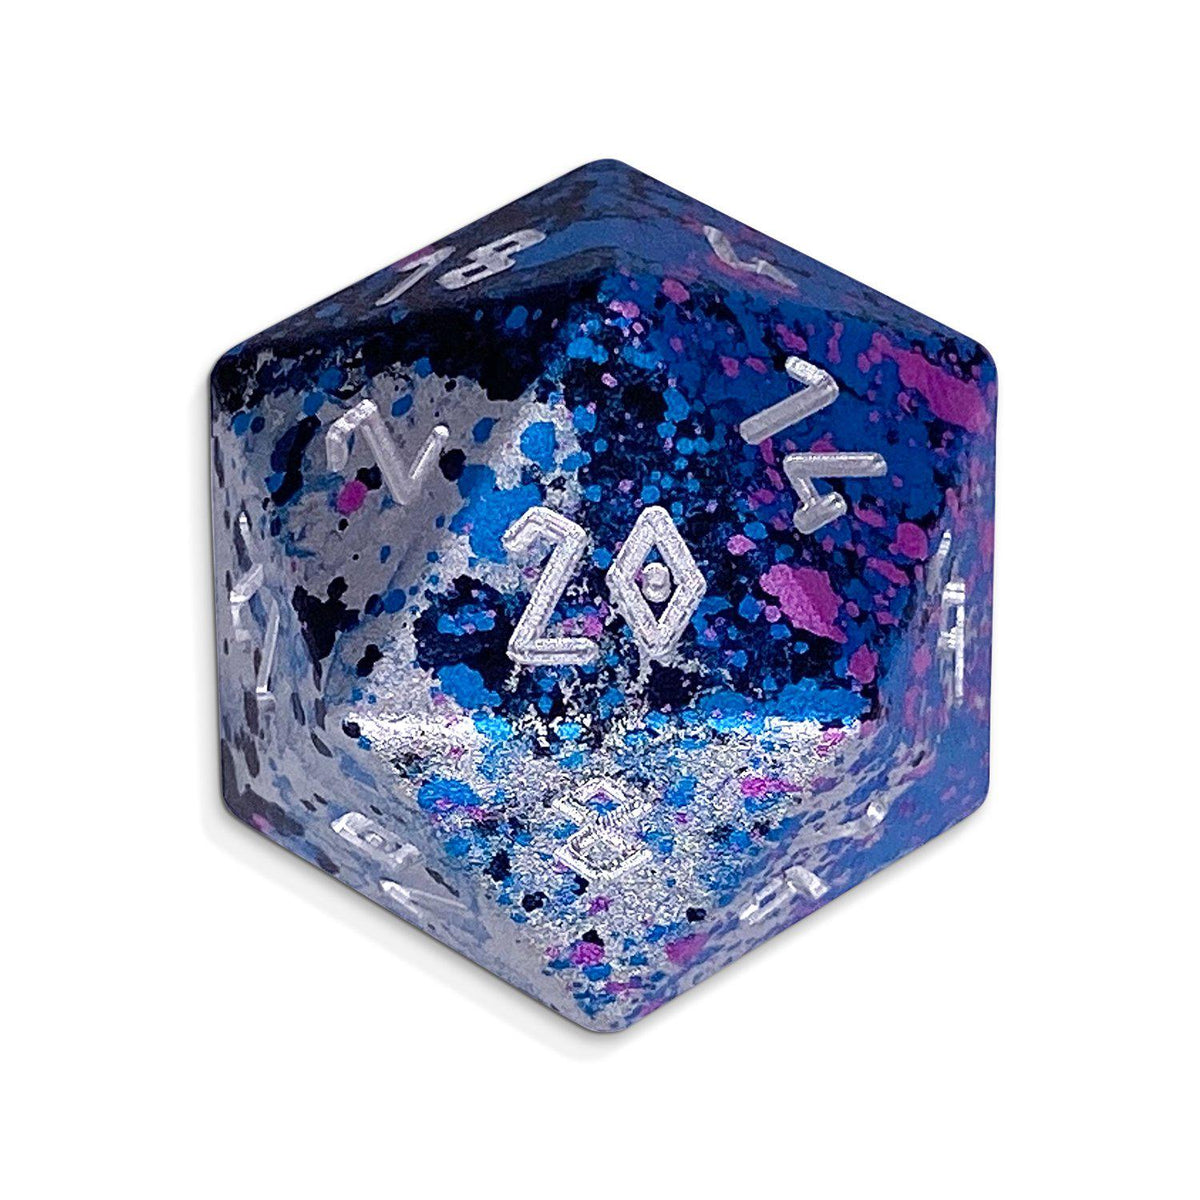 Single Wondrous Dice® D20 in Magic Missile by Norse Foundry® 6063 Aircraft Grade Aluminum